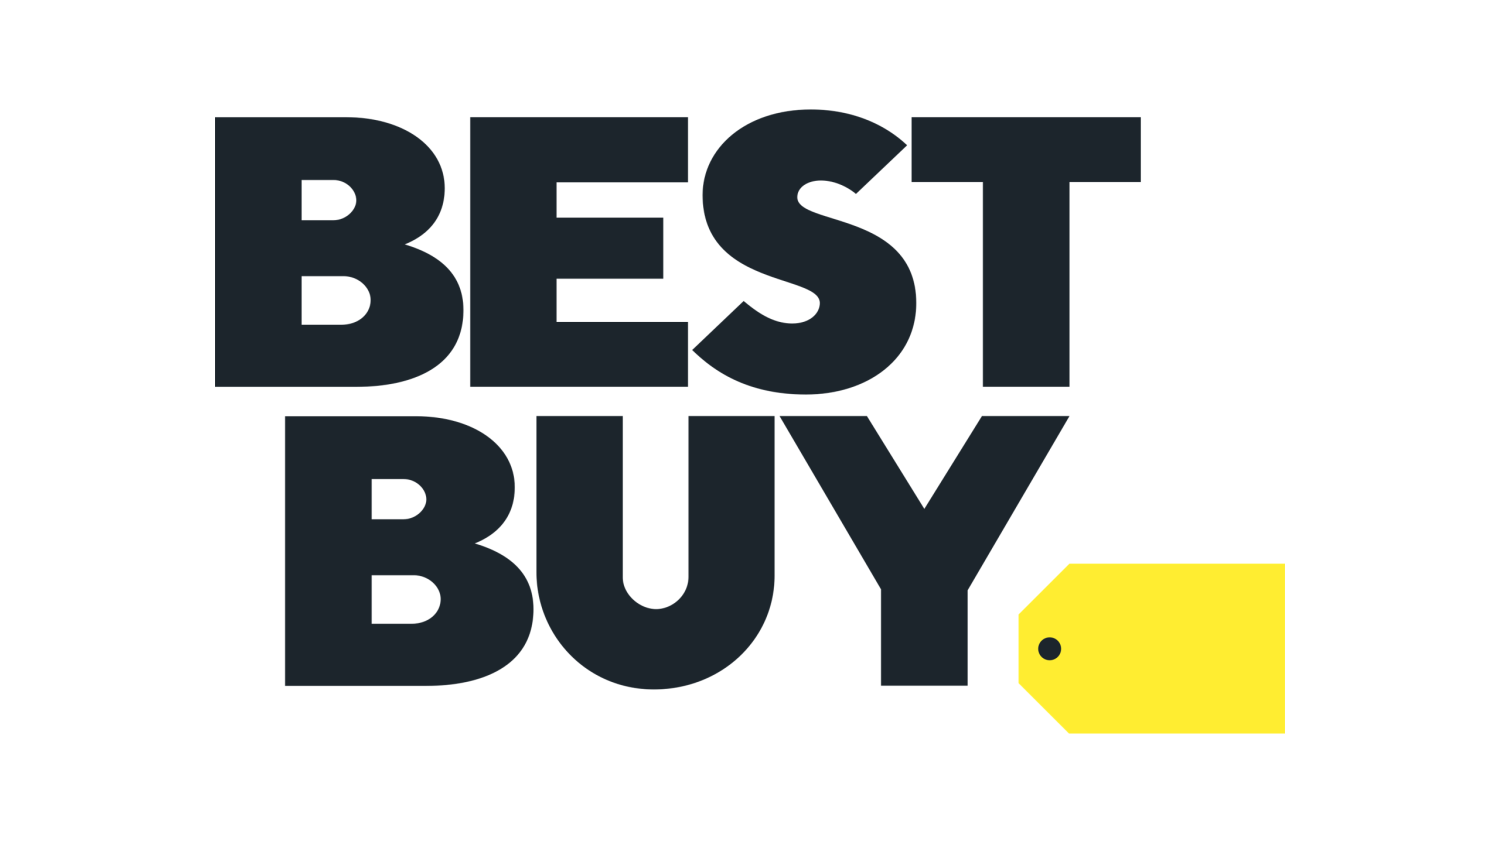 Black Friday Blu Ray Deals?!?! Not one at either Best Buy or Wal-mart